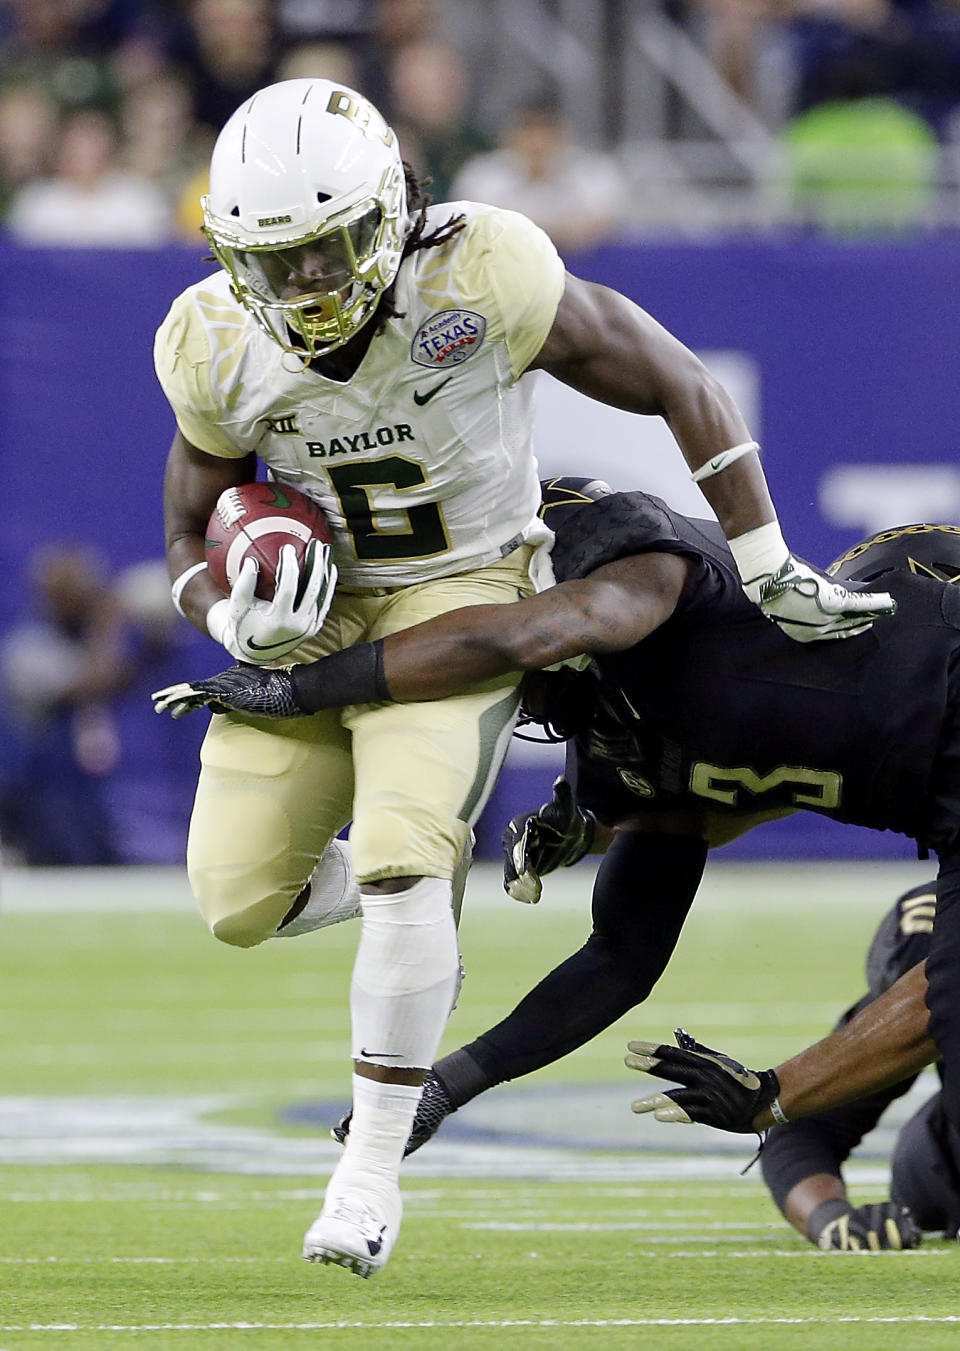 Baylor running back JaMycal Hasty (6) is tackled by Vanderbilt defensive back Tae Daley (3) during the first half of the Texas Bowl NCAA college football game Thursday, Dec. 27, 2018, in Houston. (AP Photo/Michael Wyke)